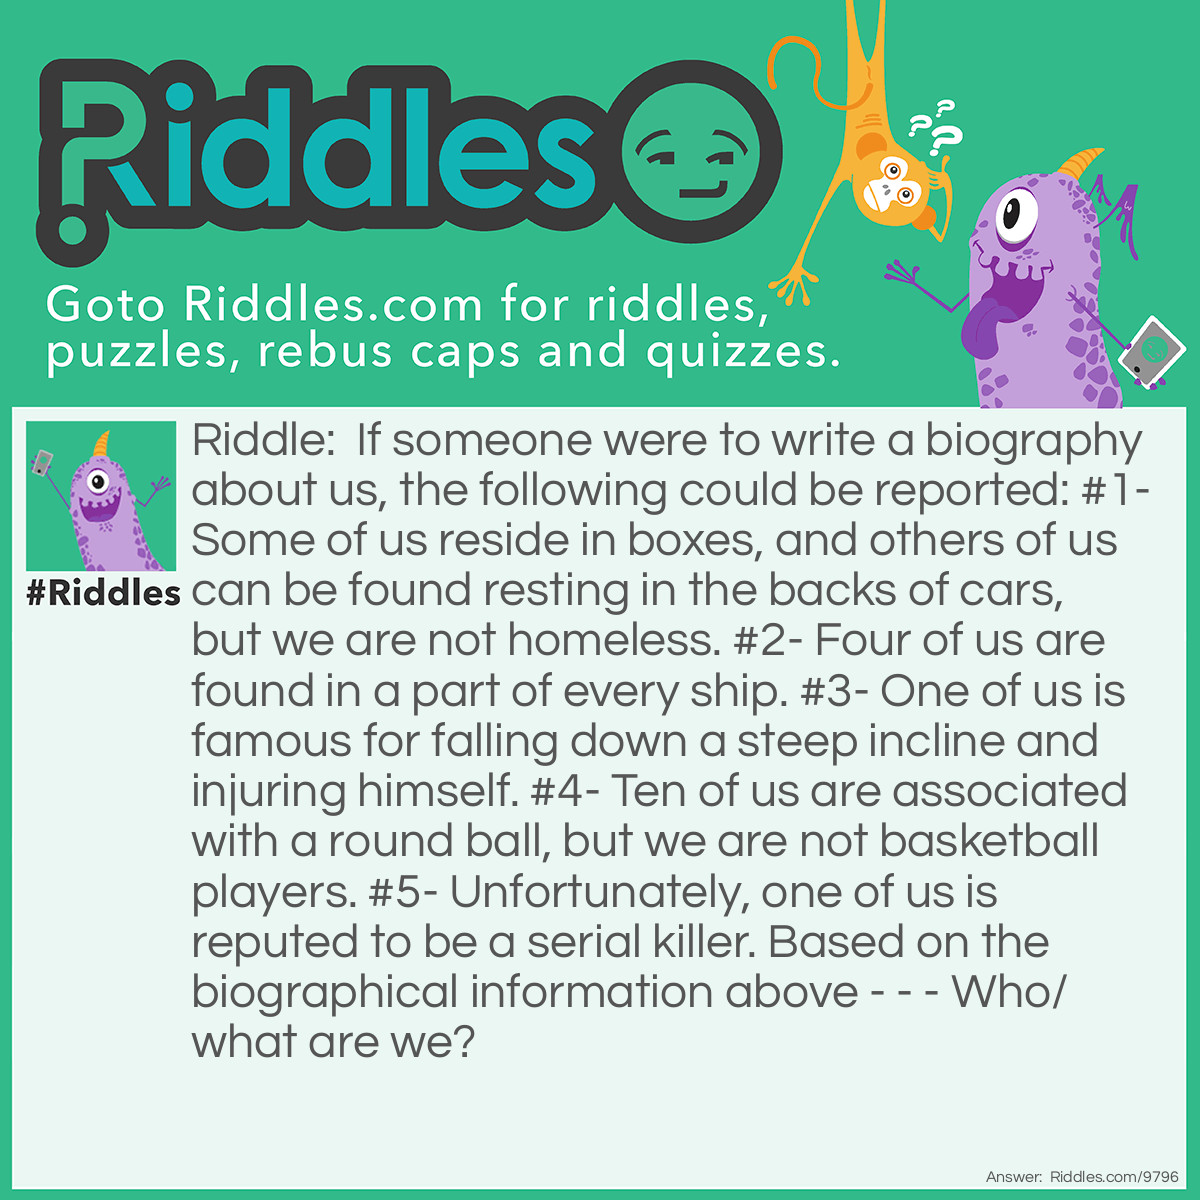 Riddle: If someone were to write a biography about us, the following could be reported: #1- Some of us reside in boxes, and others of us can be found resting in the backs of cars, but we are not homeless. #2- Four of us are found in a part of every ship. #3- One of us is famous for falling down a steep incline and injuring himself. #4- Ten of us are associated with a round ball, but we are not basketball players. #5- Unfortunately, one of us is reputed to be a serial killer. Based on the biographical information above - - - Who/what are we? Answer: We are all Jacks / jacks.